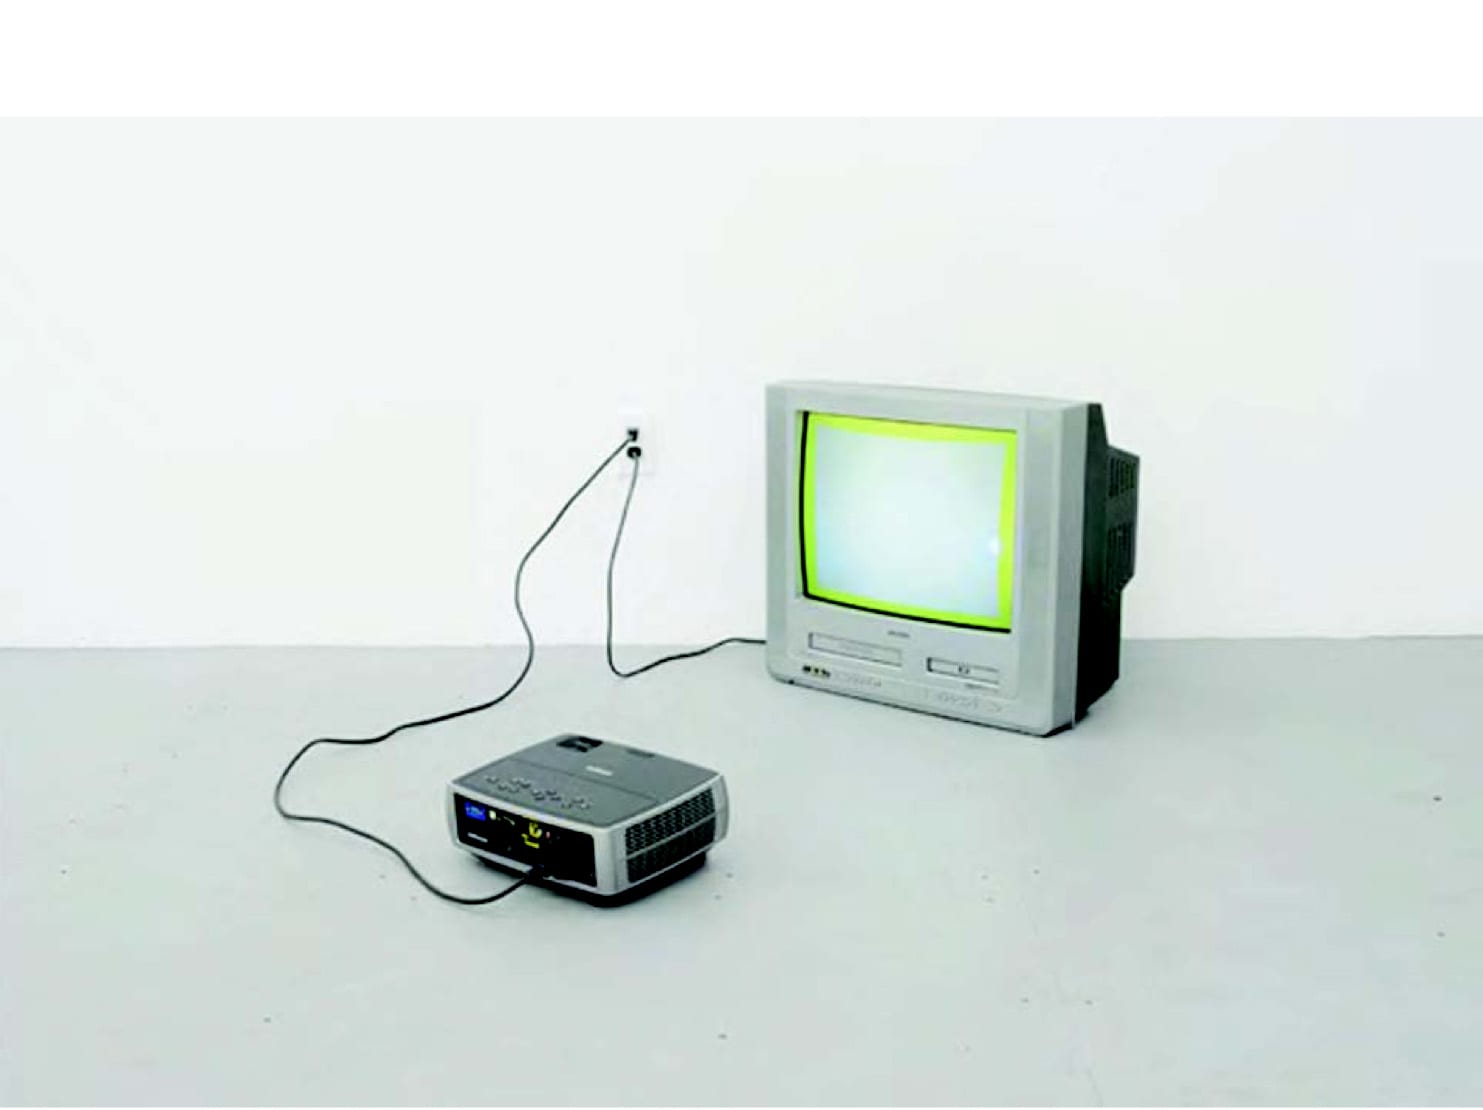 Carlos Jiménez Cahua, Untitled #72 (Native, blue output of a digital projector [i.e., one with no video input] pointed toward a television playing a loop of a video of pure yellow), digital projector, CRT television with DVD video dimensions variable, ed. of 3 + 1AP, 2013